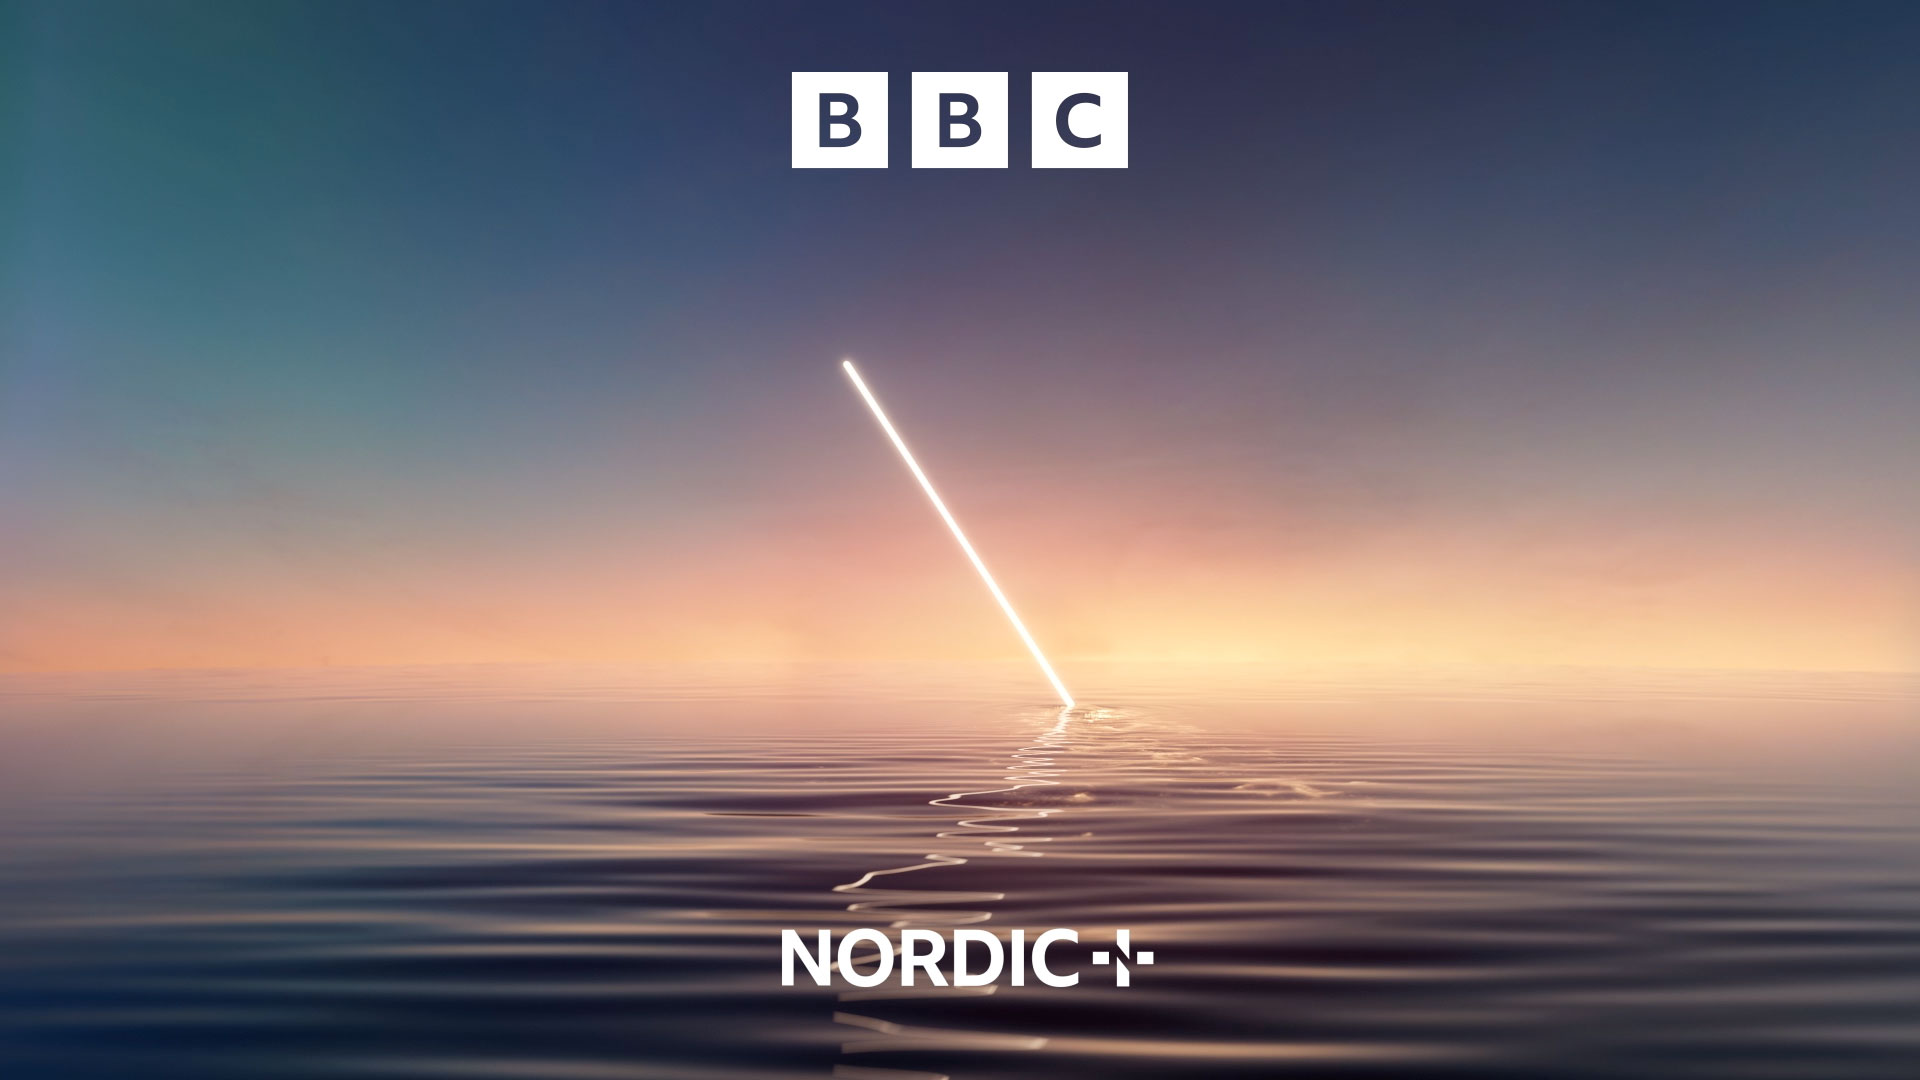 weareseventeen Forge Identity for New BBC Nordic Channel With an Aesthetic Built on the Principles of Light